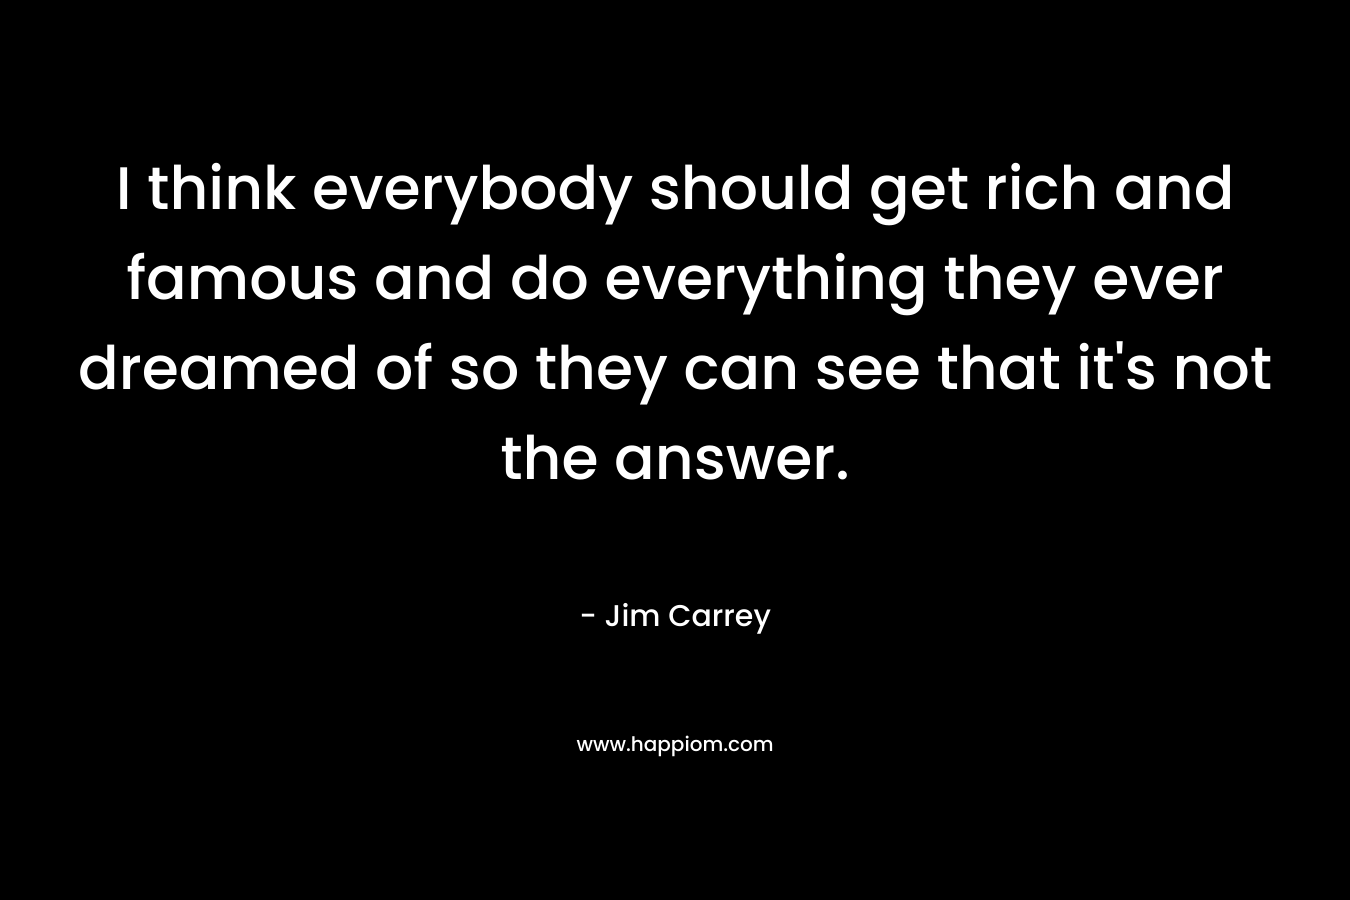 I think everybody should get rich and famous and do everything they ever dreamed of so they can see that it’s not the answer. – Jim Carrey